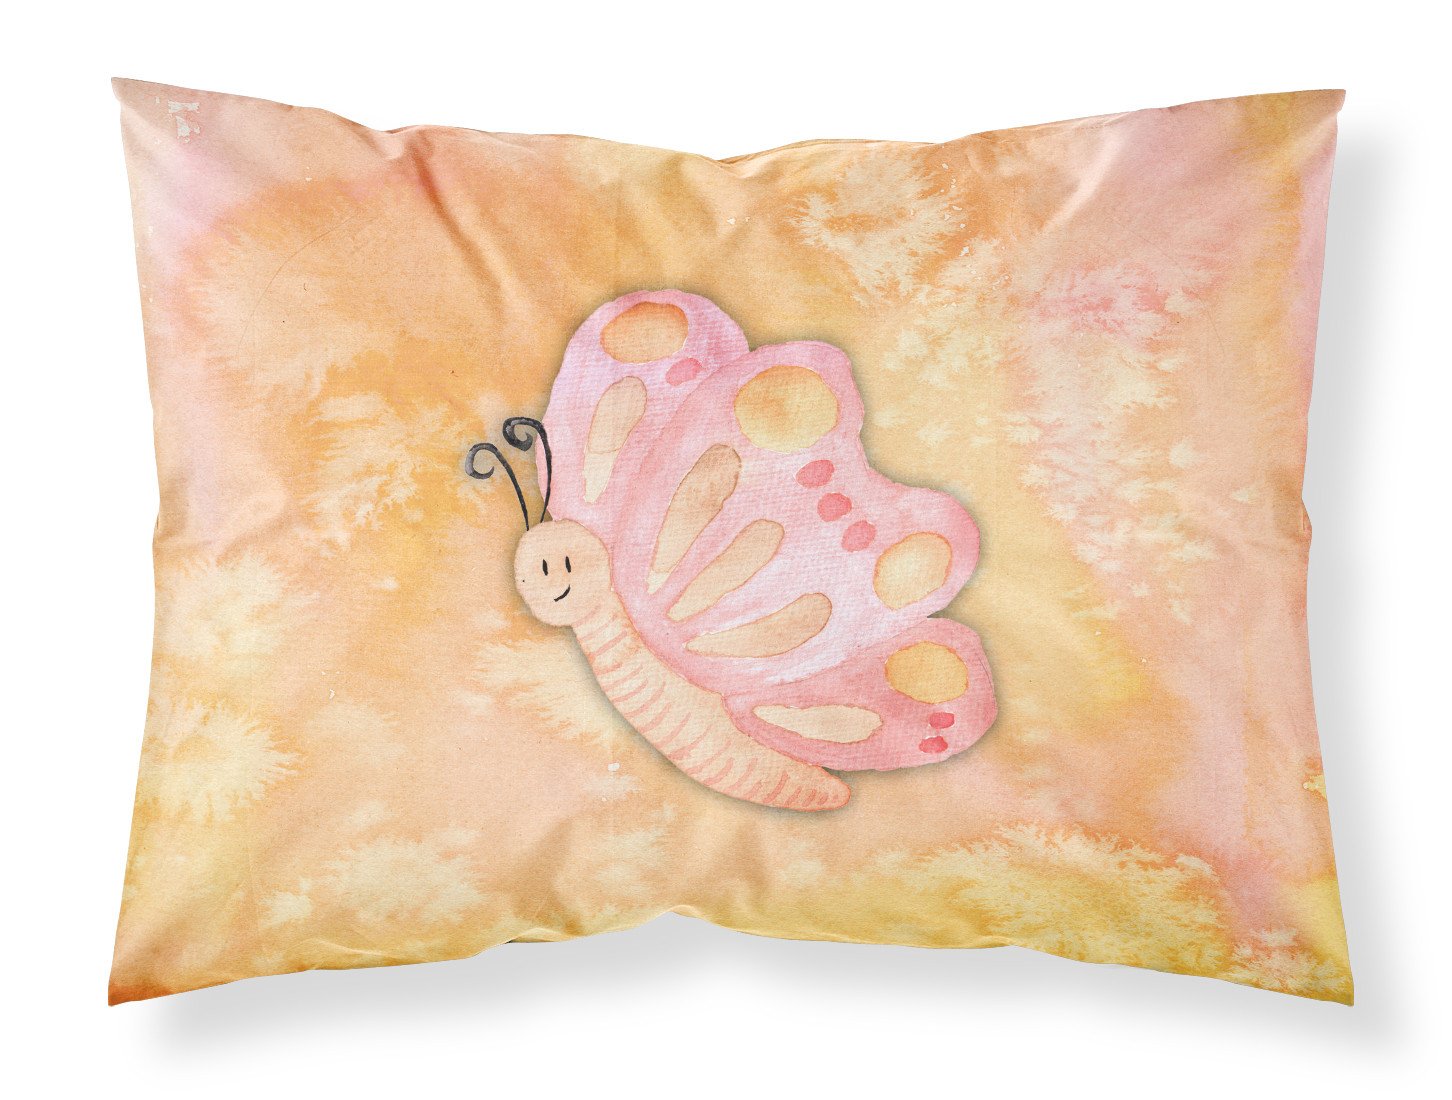 Butterfly Watercolor Fabric Standard Pillowcase BB7384PILLOWCASE by Caroline's Treasures